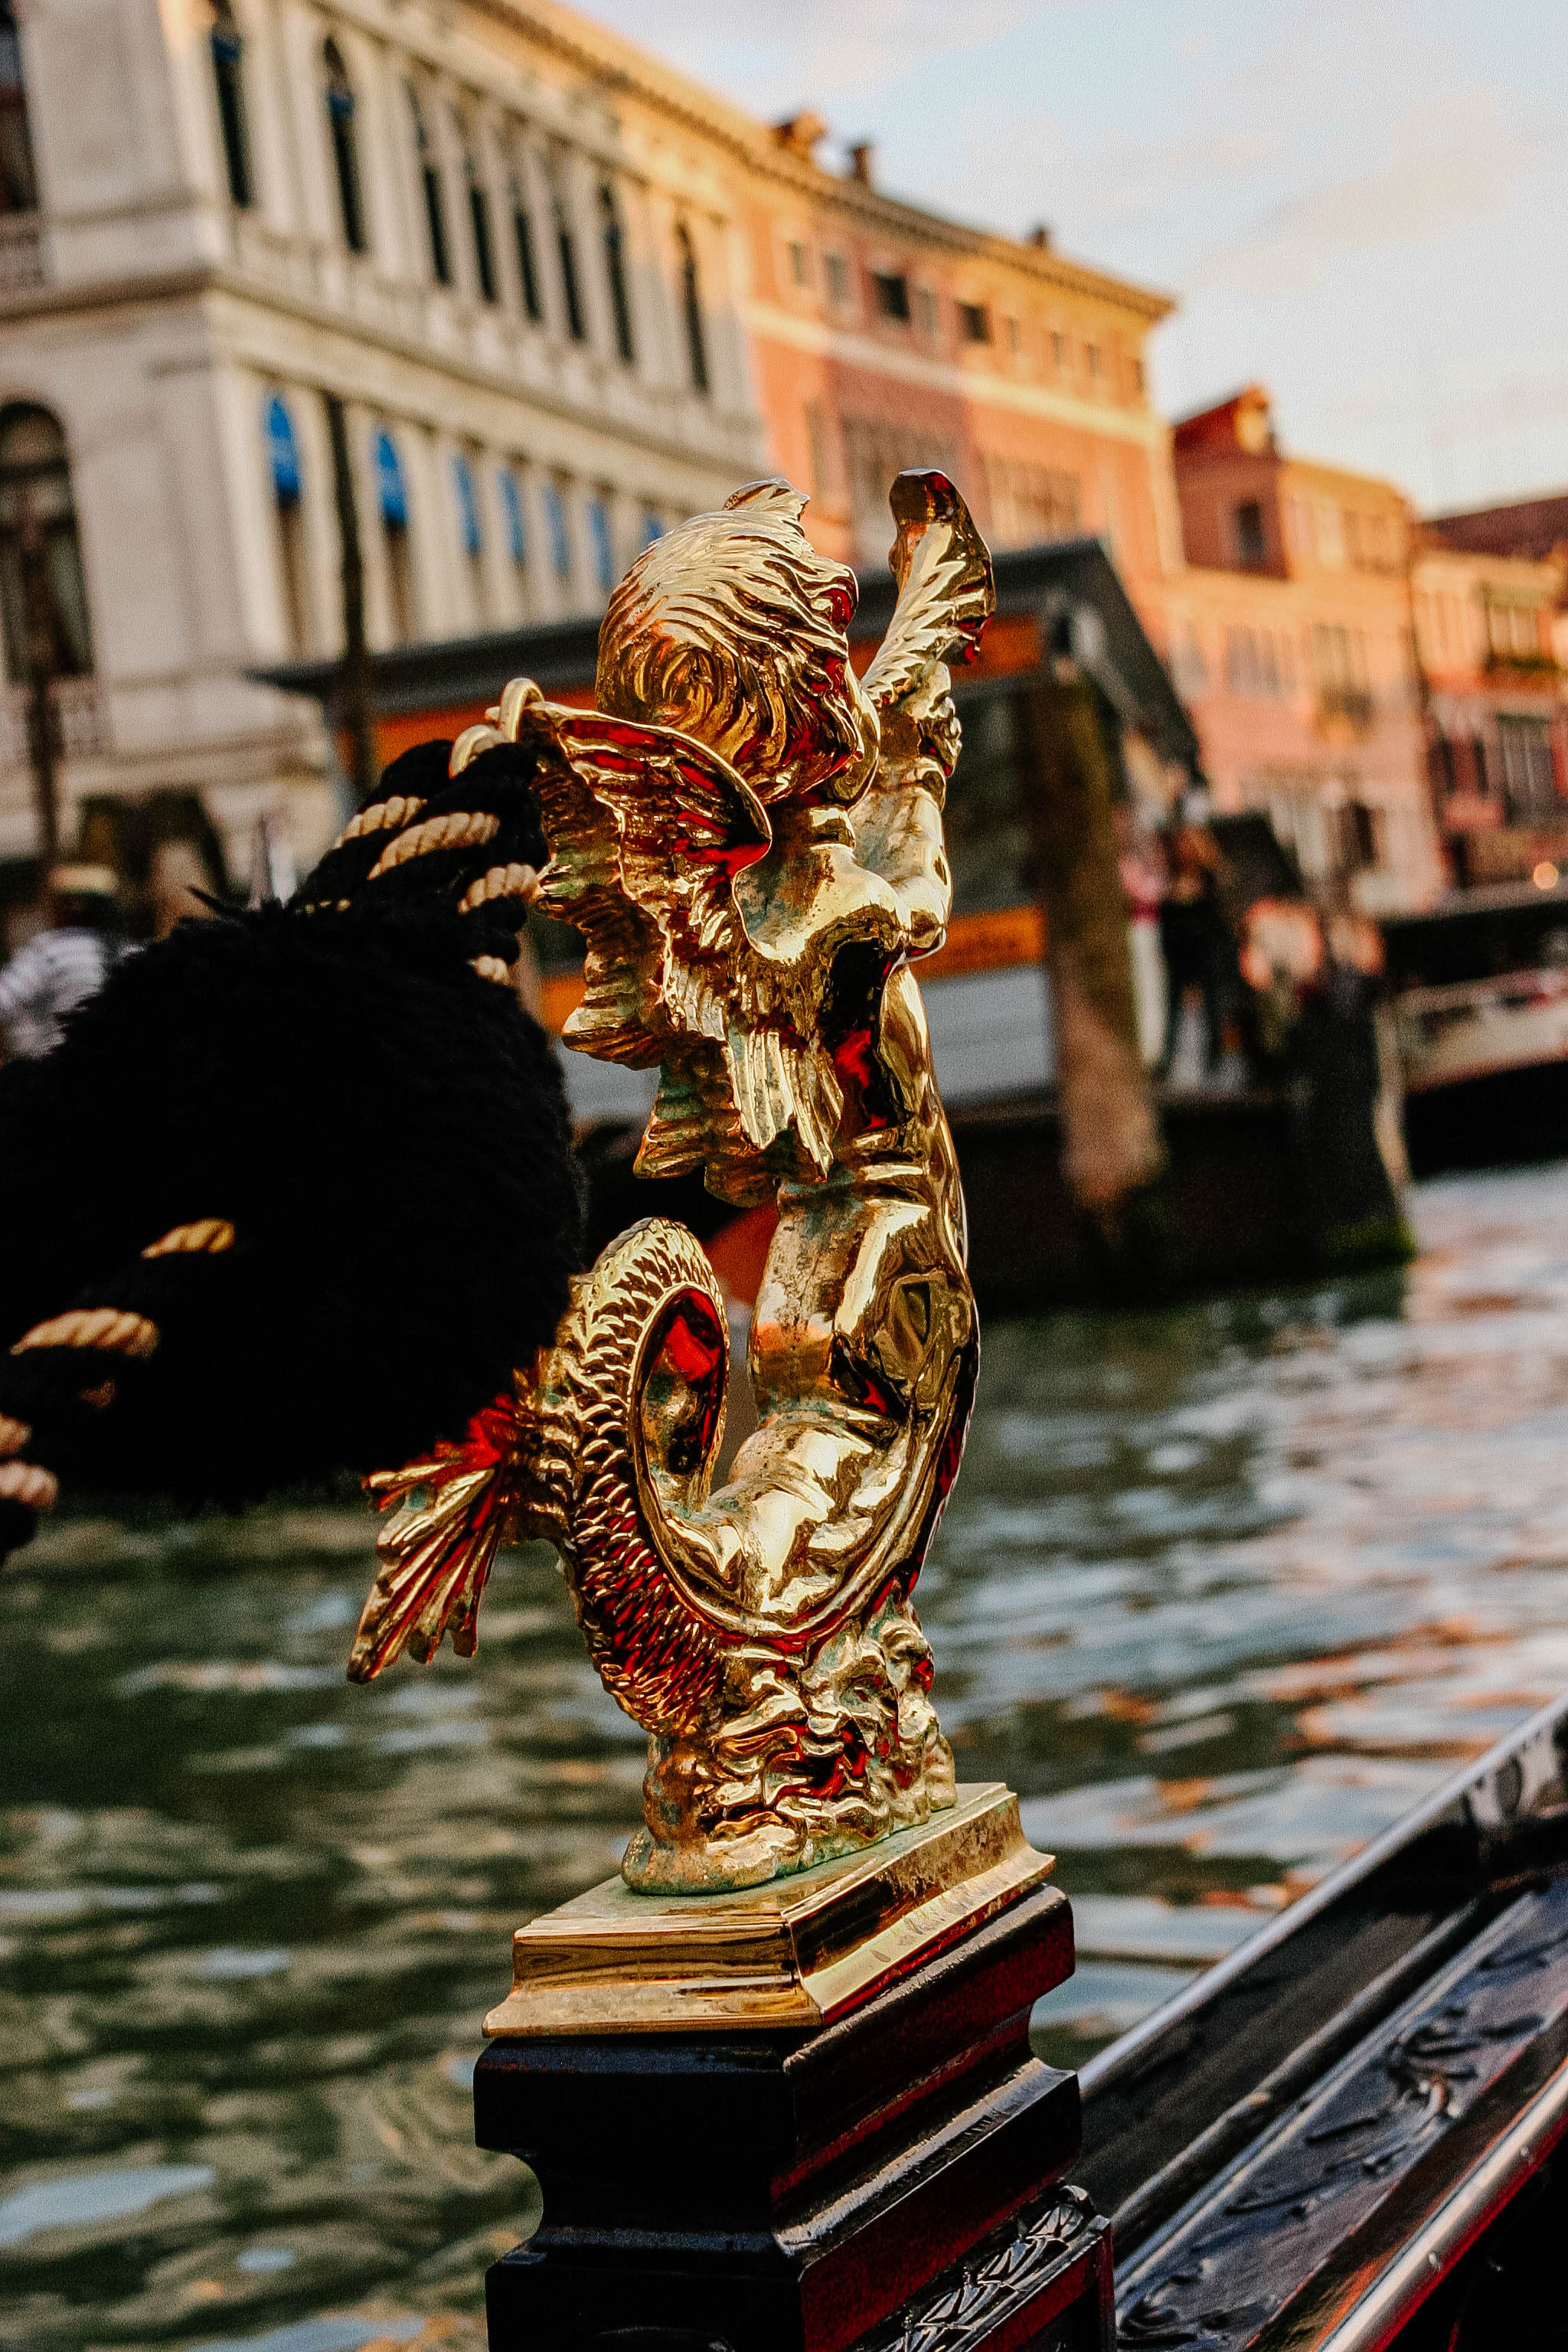 Experience all of Venice's beauty through this photo tour. Enjoy all of the most popular sights, off the beaten path canals and daily life of Venice with this photo tour. #venice #italy